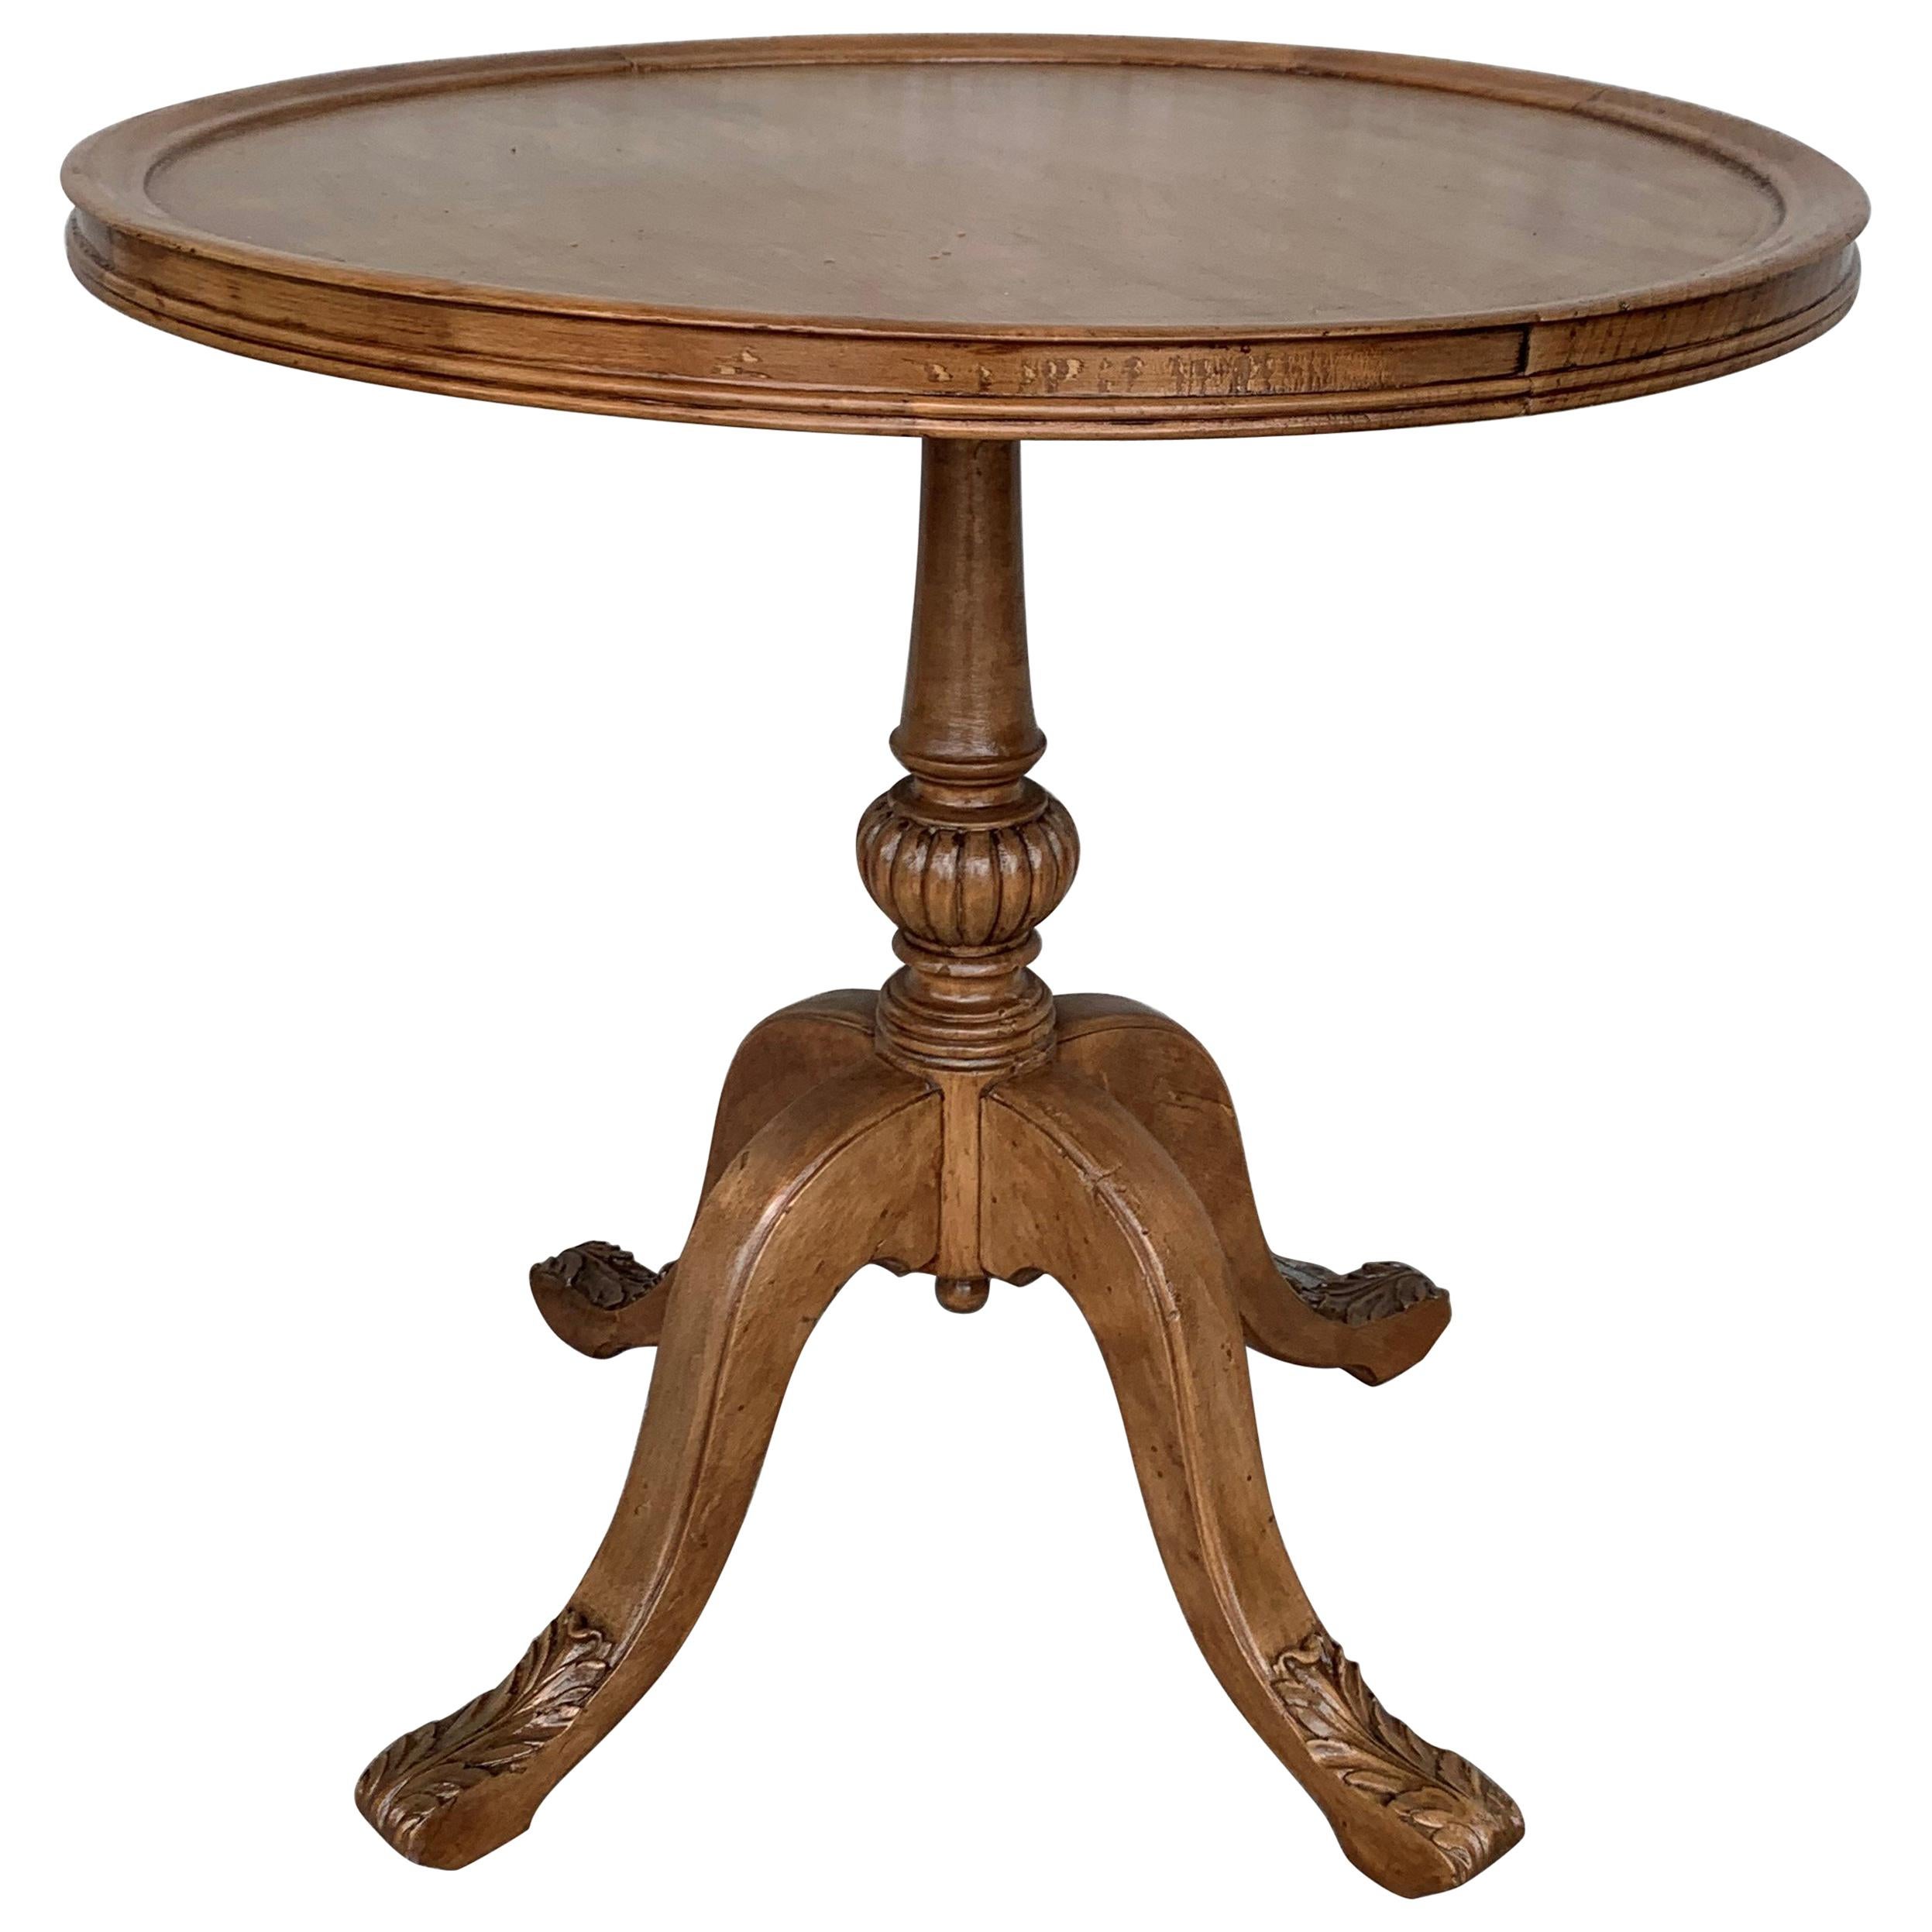 Pedestal Walnut Round Coffee or Side Table with Ornamental Carved Legs